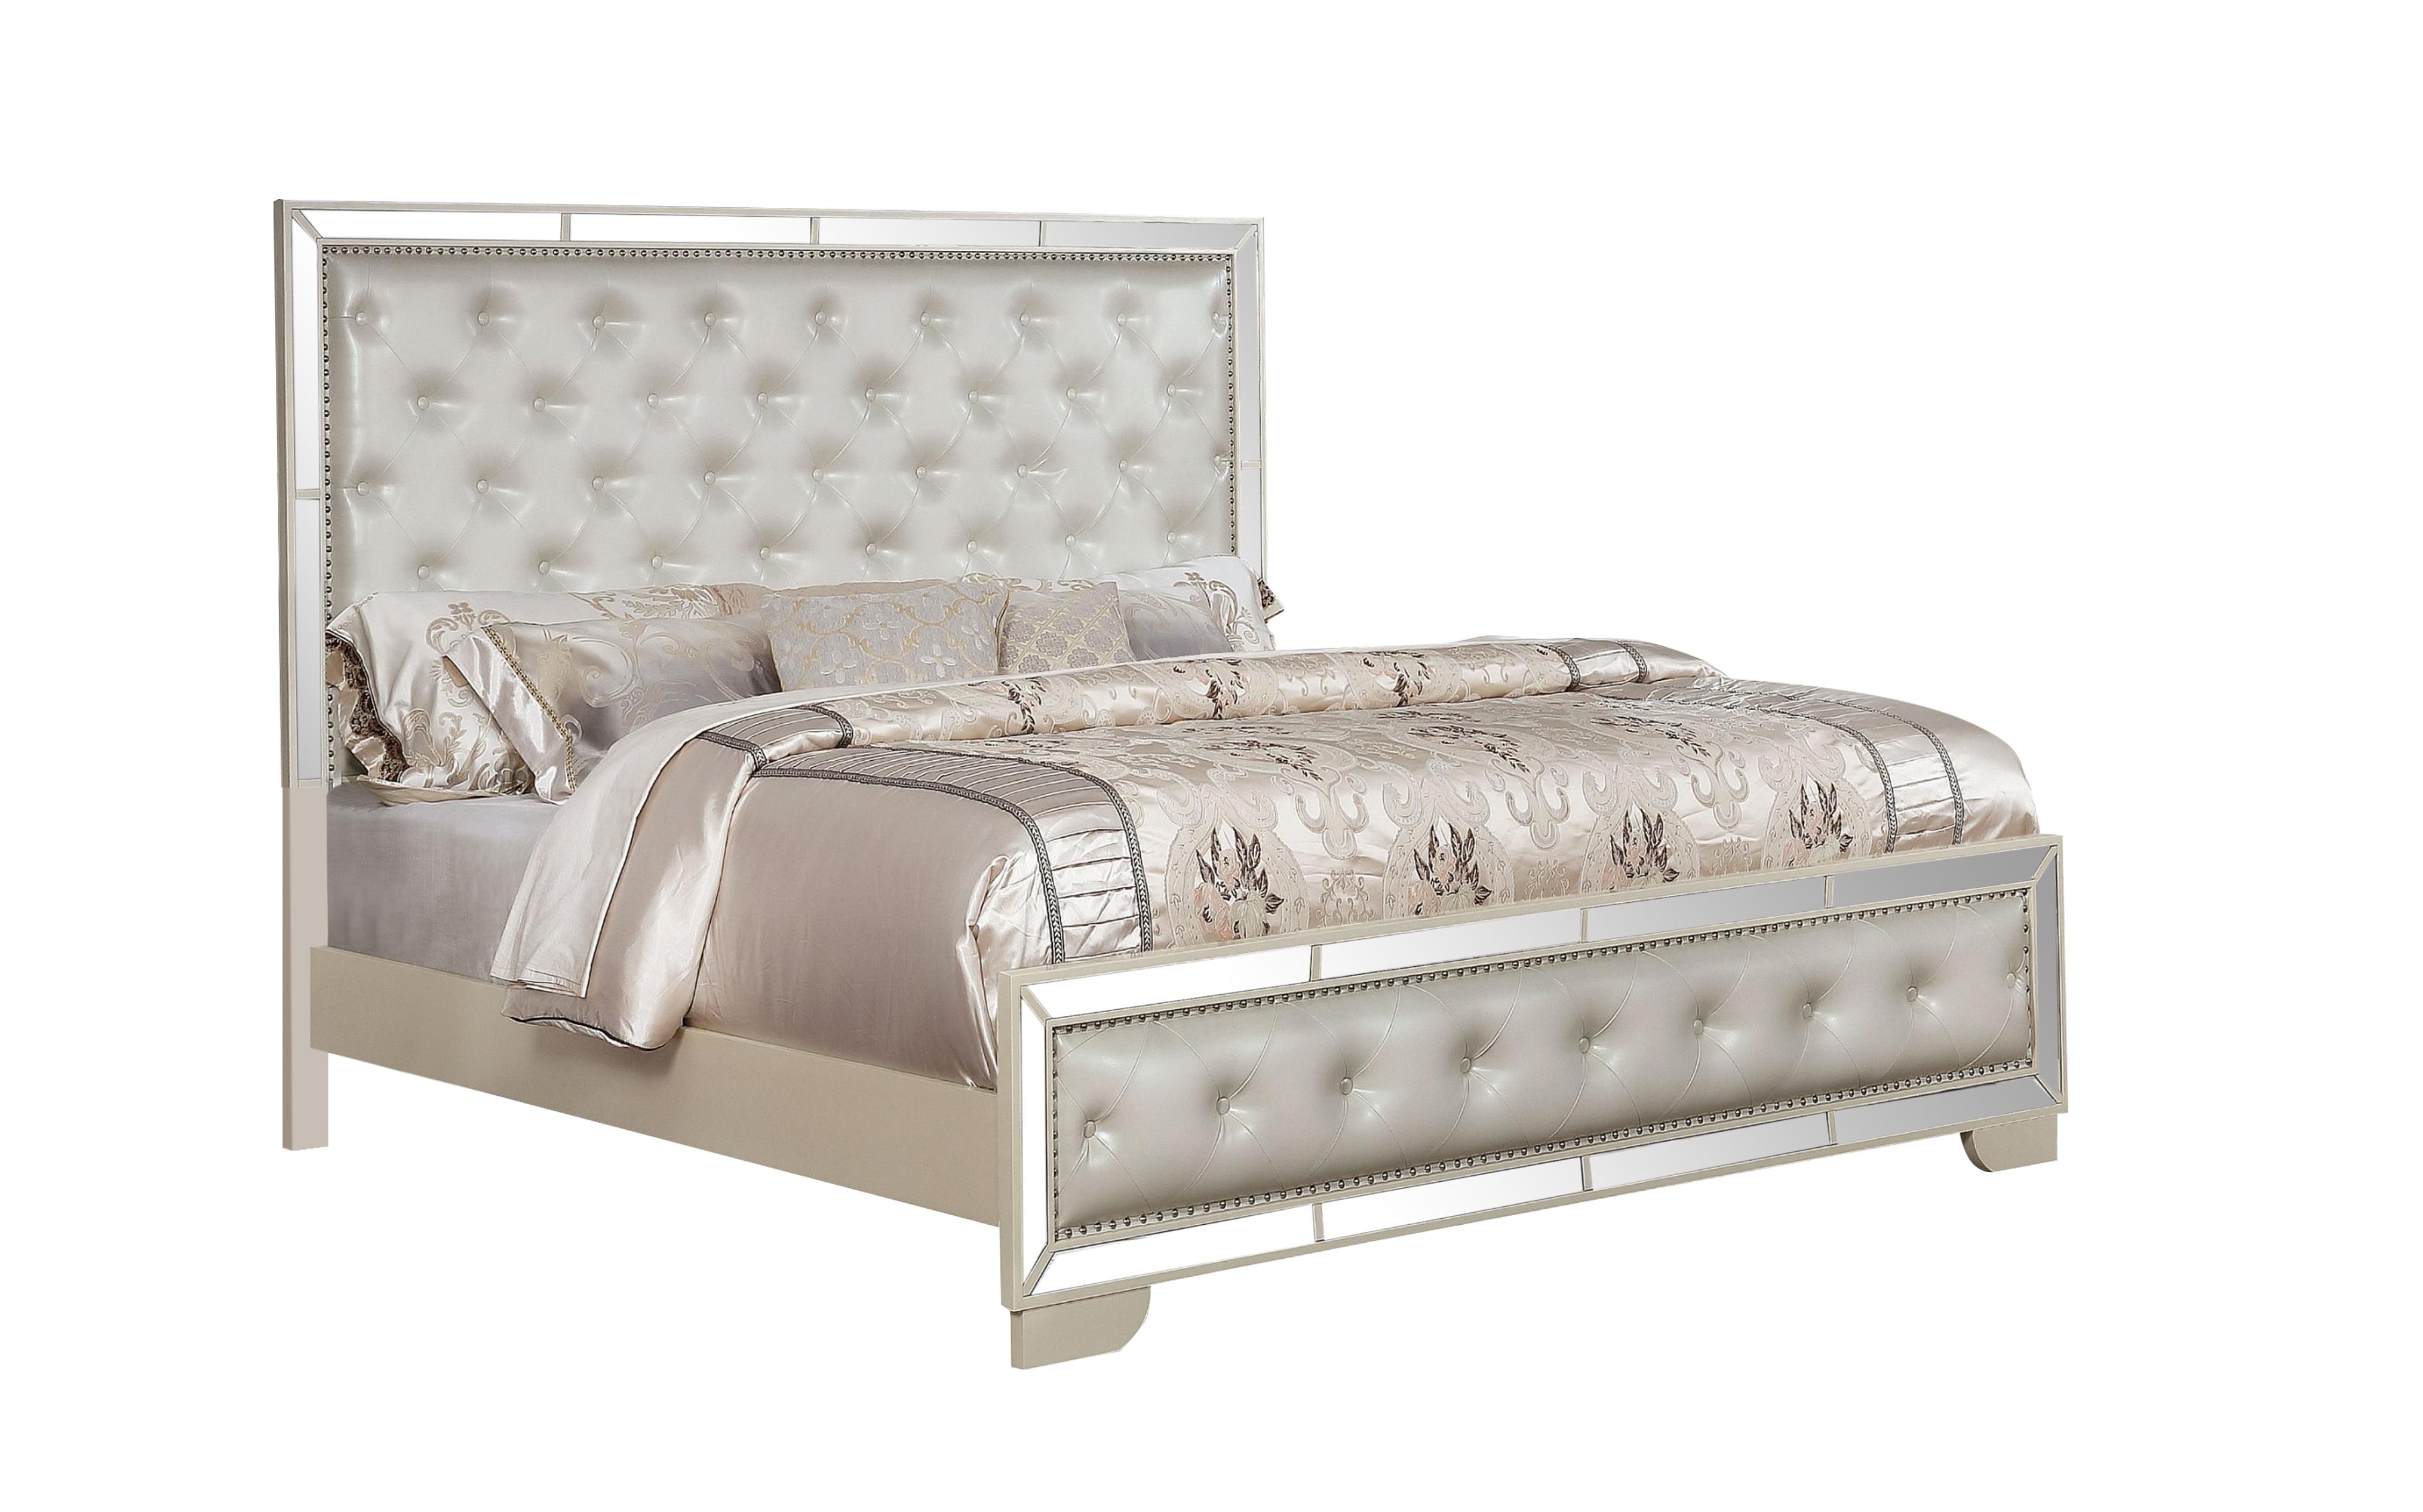 

    
Glam Beige Mirrored Inlay Tufted King Bedroom Set 5P MADISON Galaxy Home Modern
